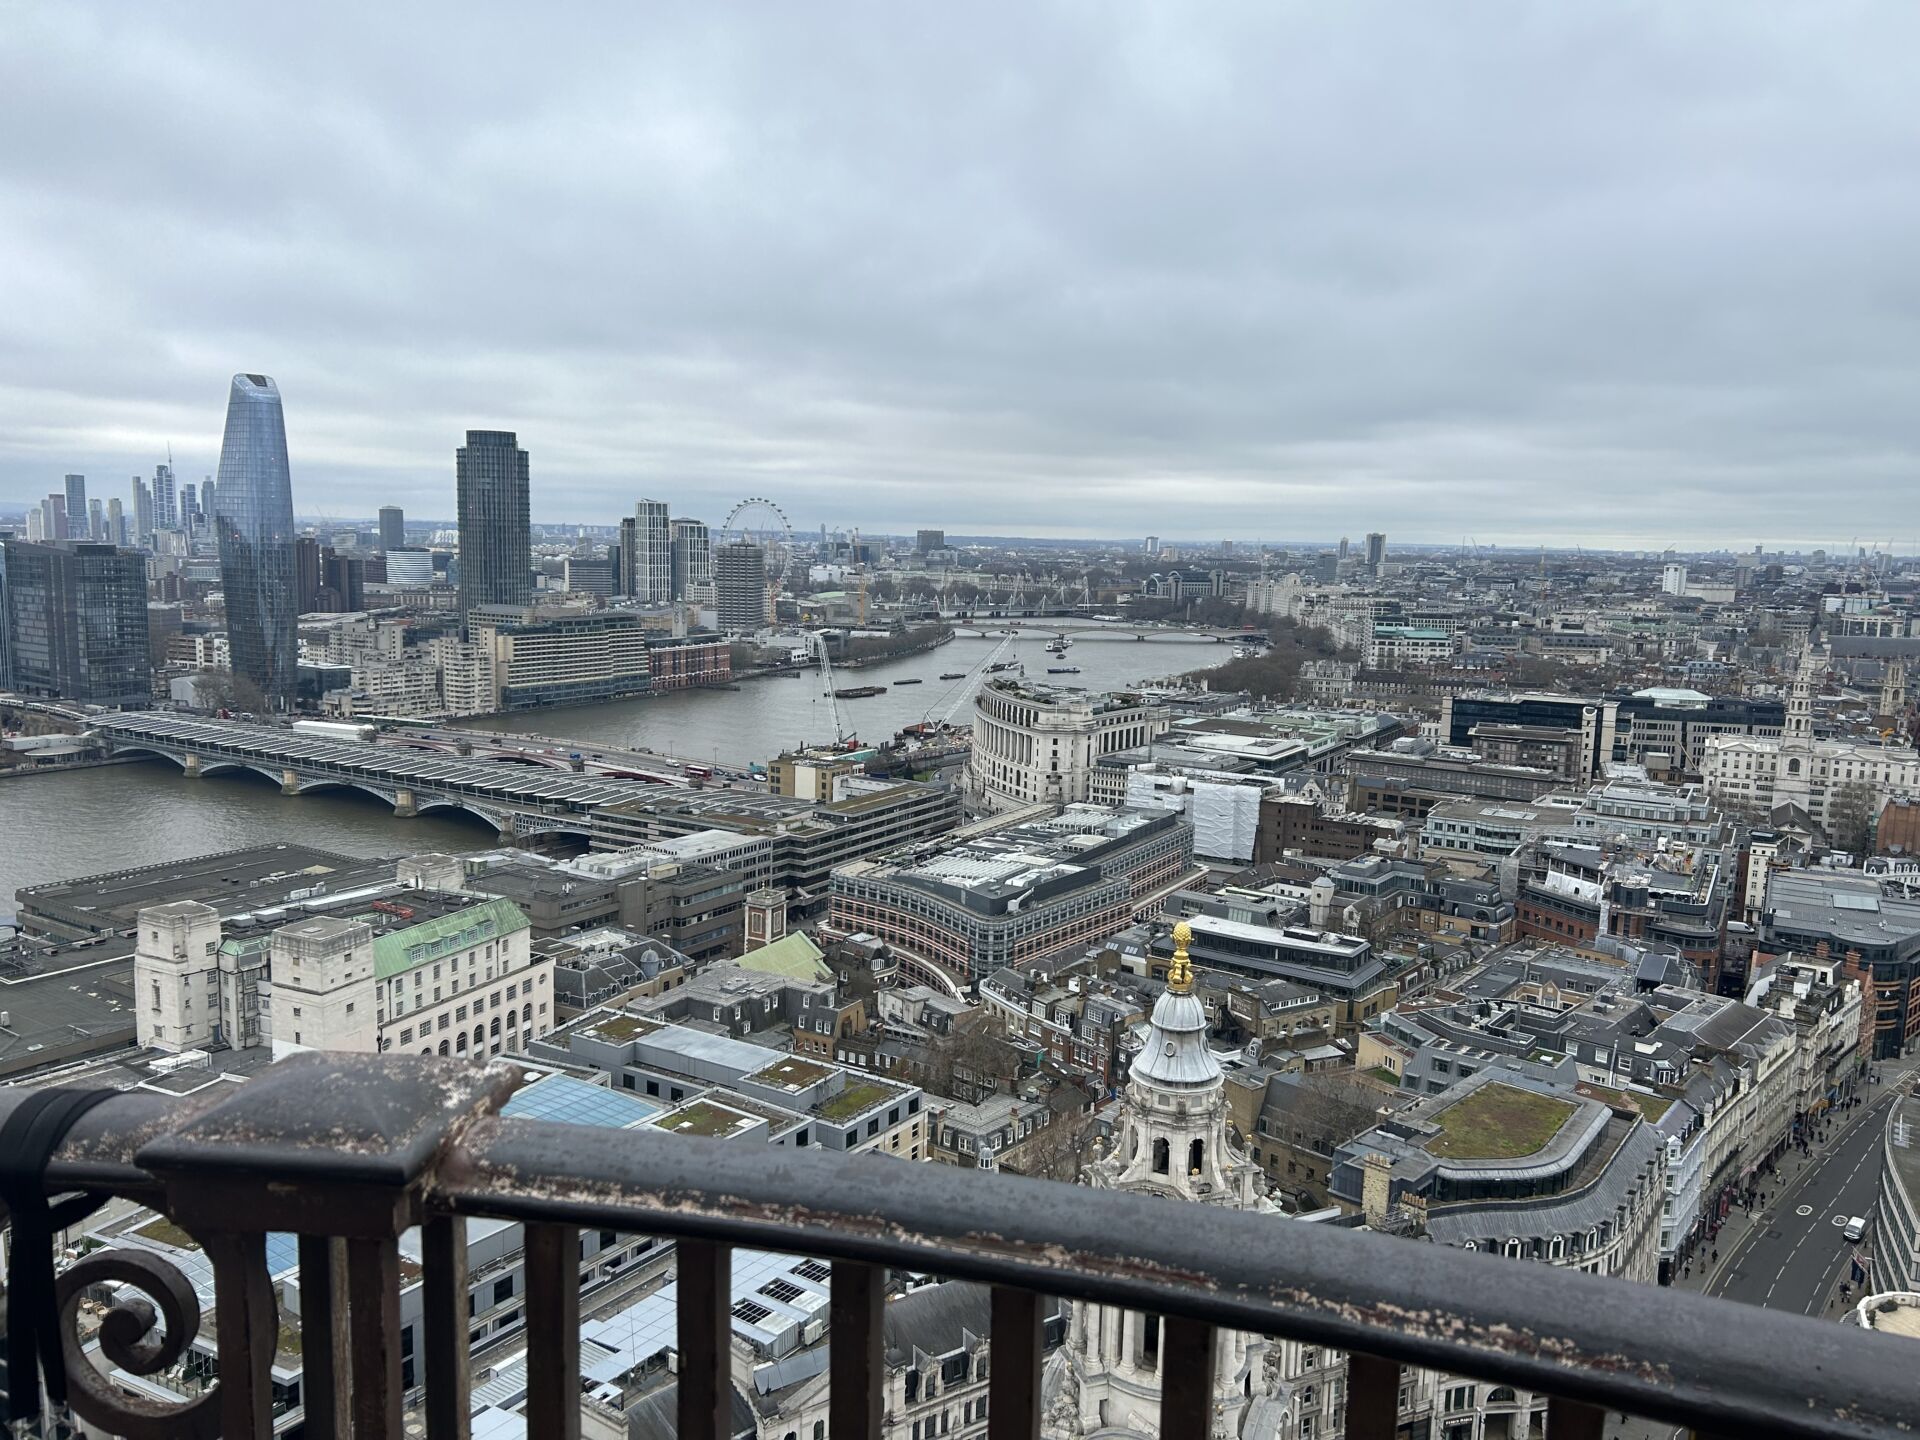 View from the roof at St Paul's Cathedral. Photo Credit: © Edwin Lerner.